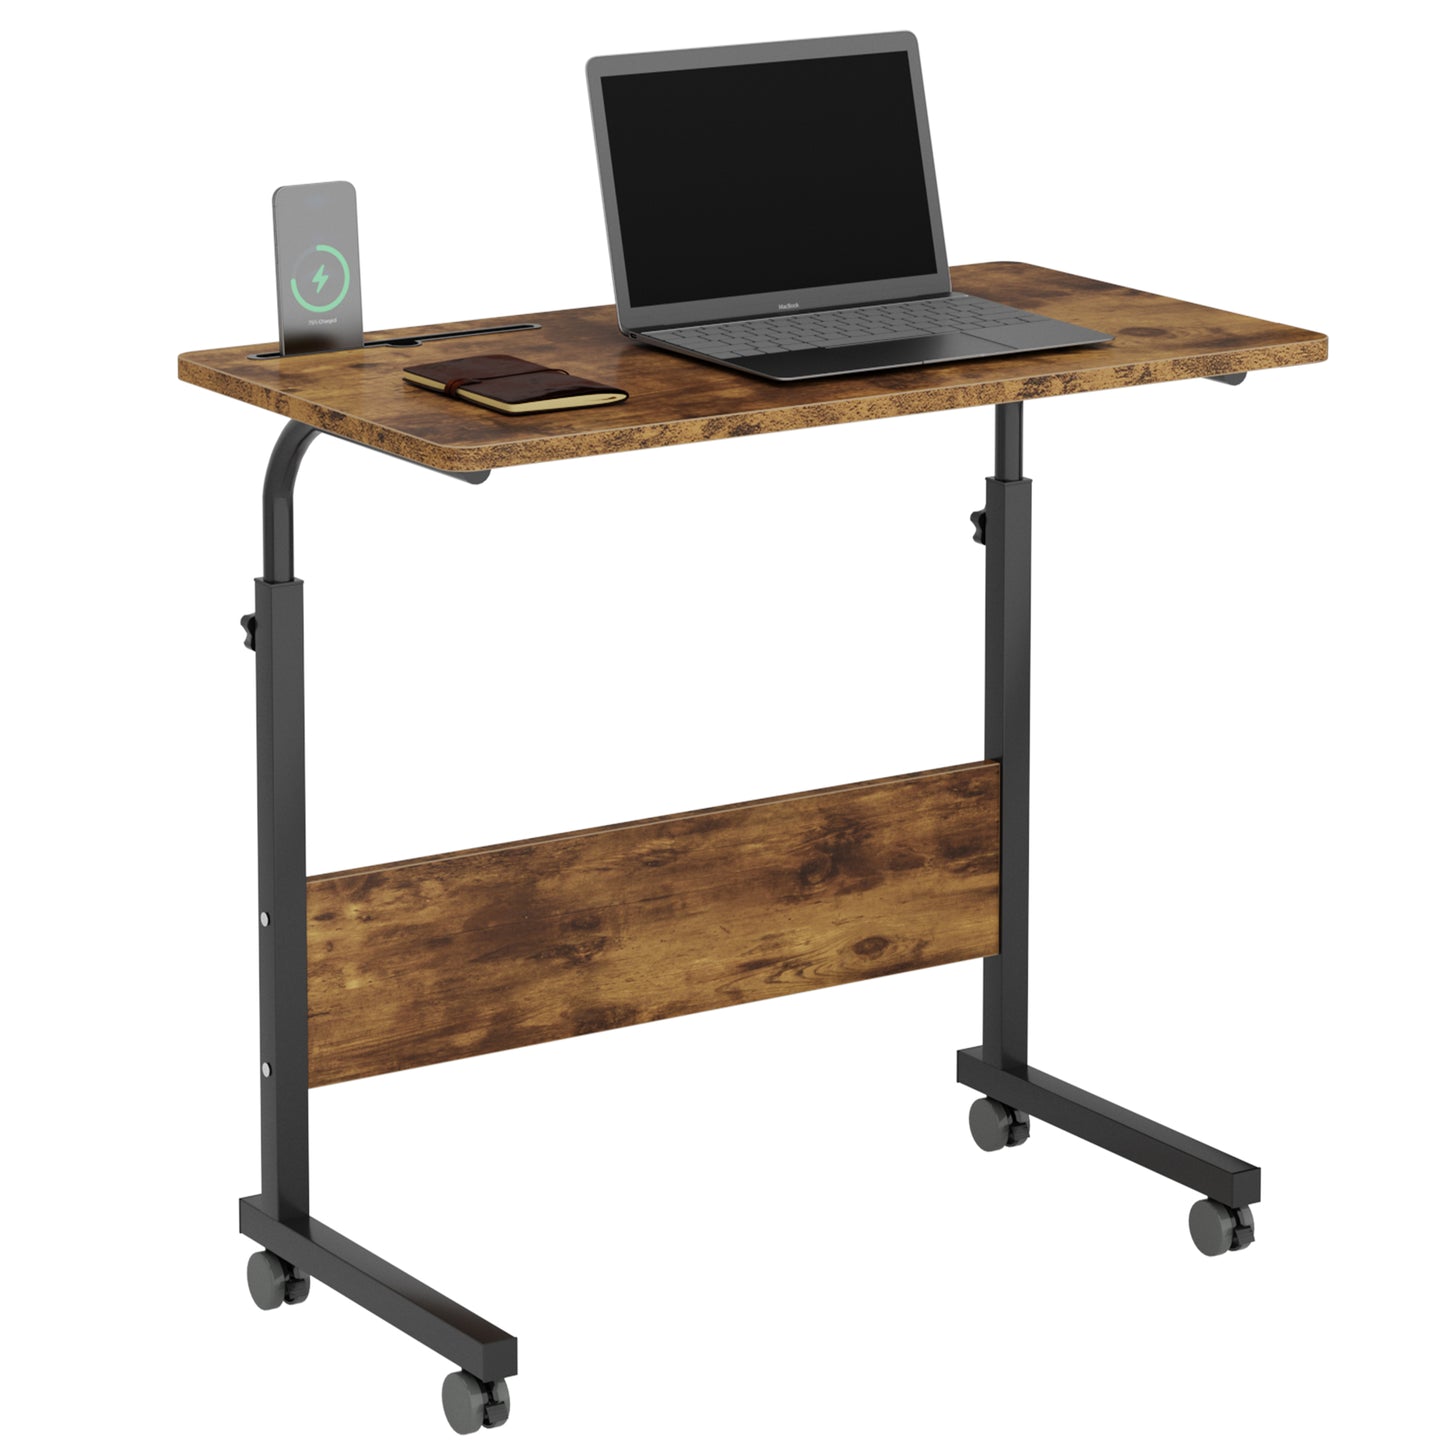 SogesPower C-Shaped Side End Table with Wheels, Sit-Stand Desk with Adjustable Height, Card Slot